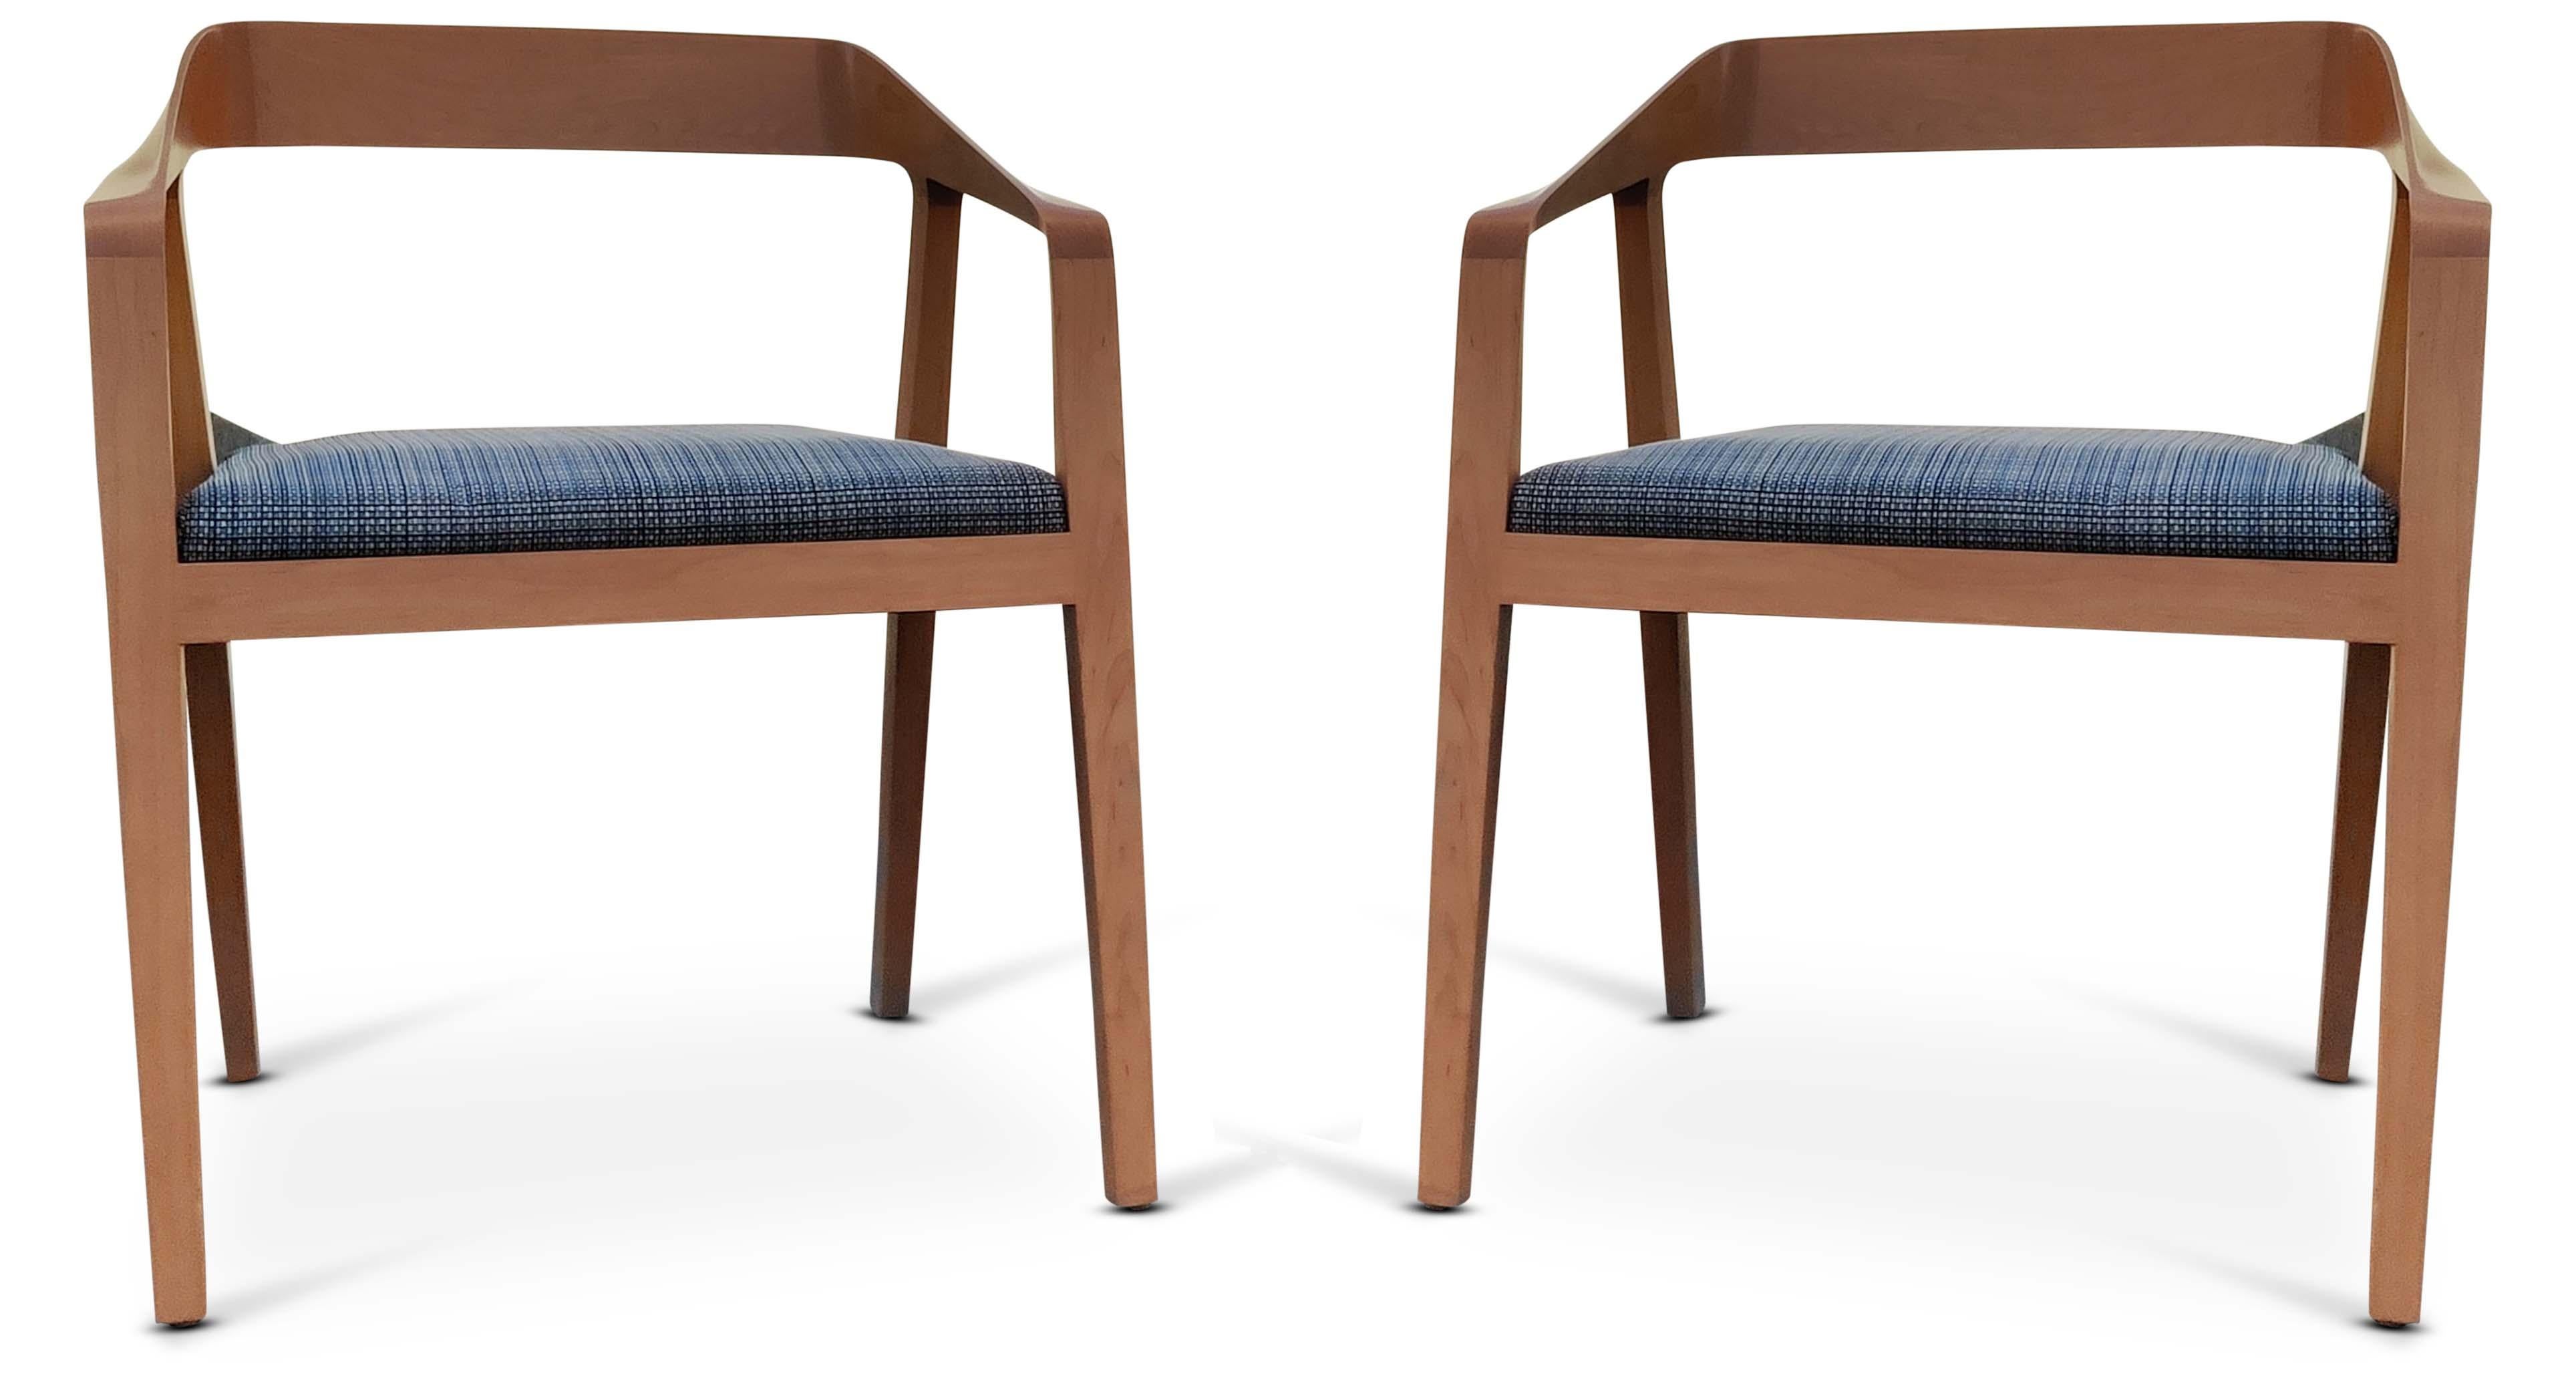 This pair of chairs was designed with a masterful eye. The solid ash wood construction has very modern and sleek lines, twisting and turning. The pieces of the frame meld together, with sculpted ribbons of wood that flow seamlessly from the front